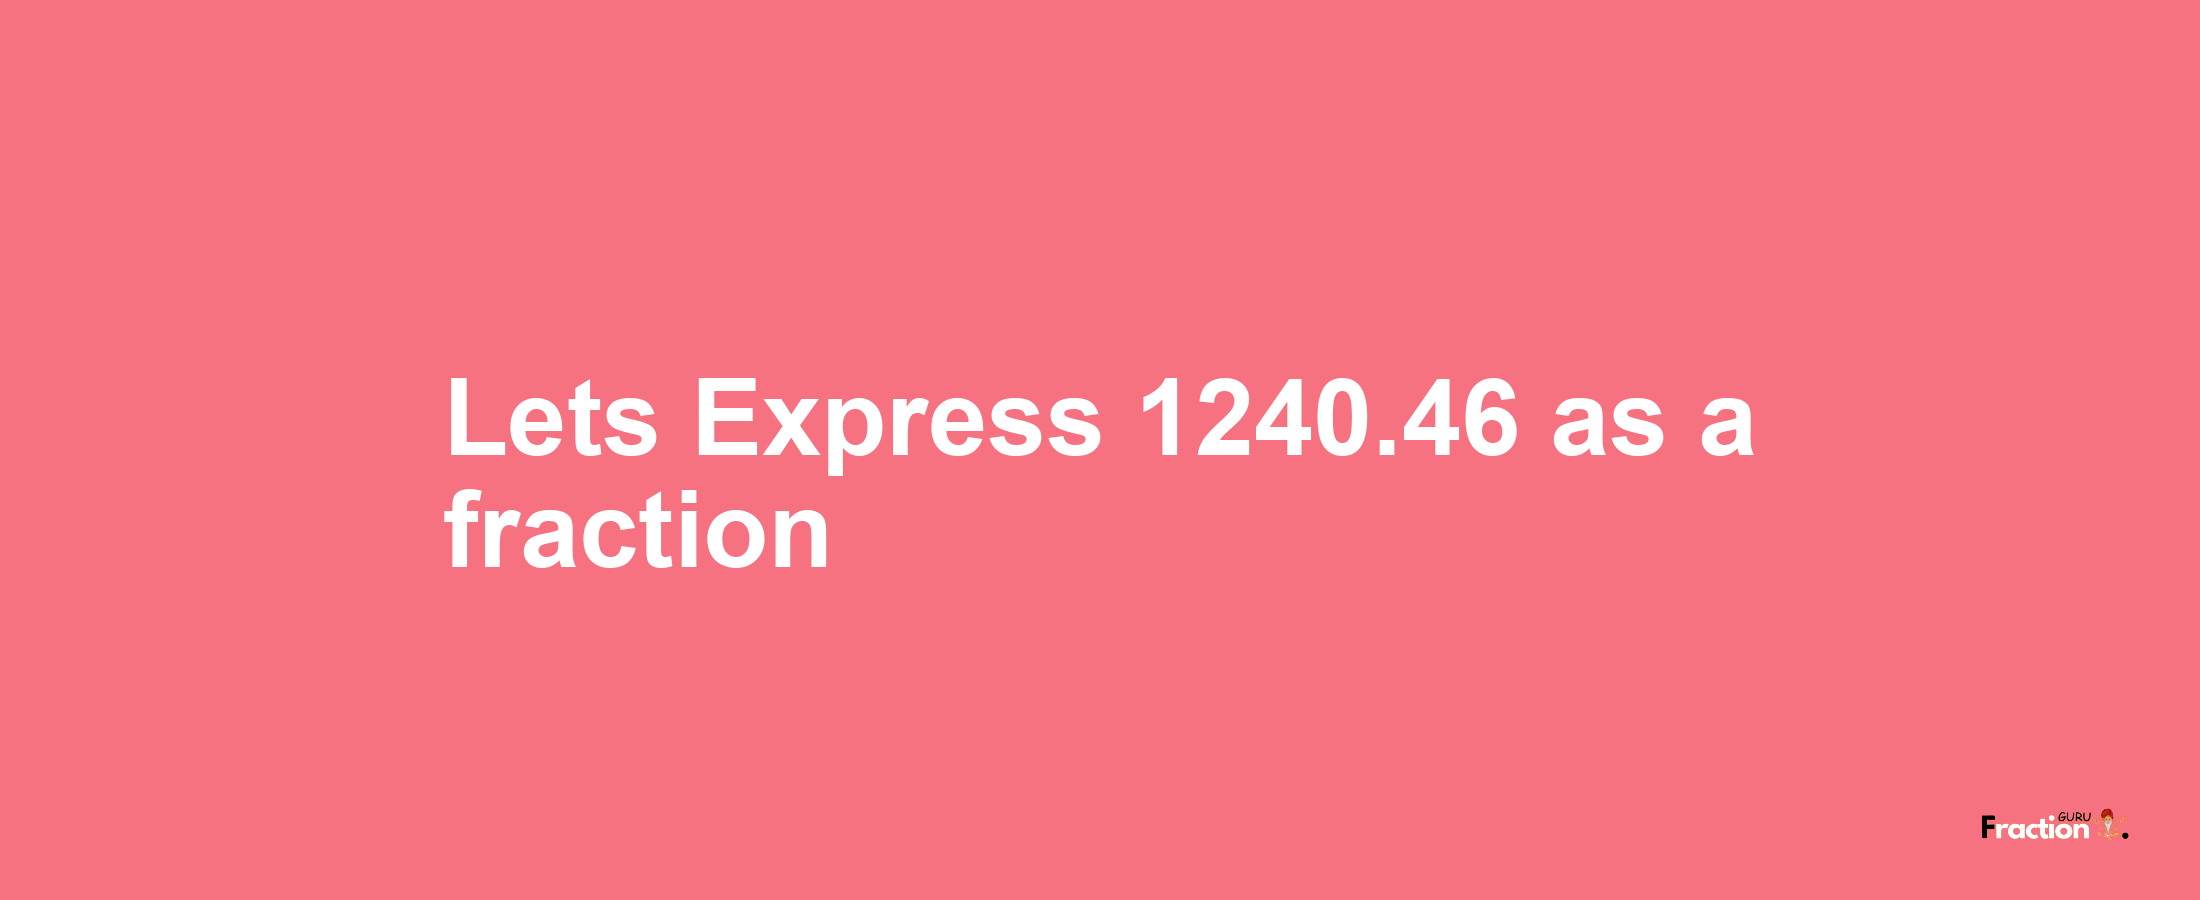 Lets Express 1240.46 as afraction